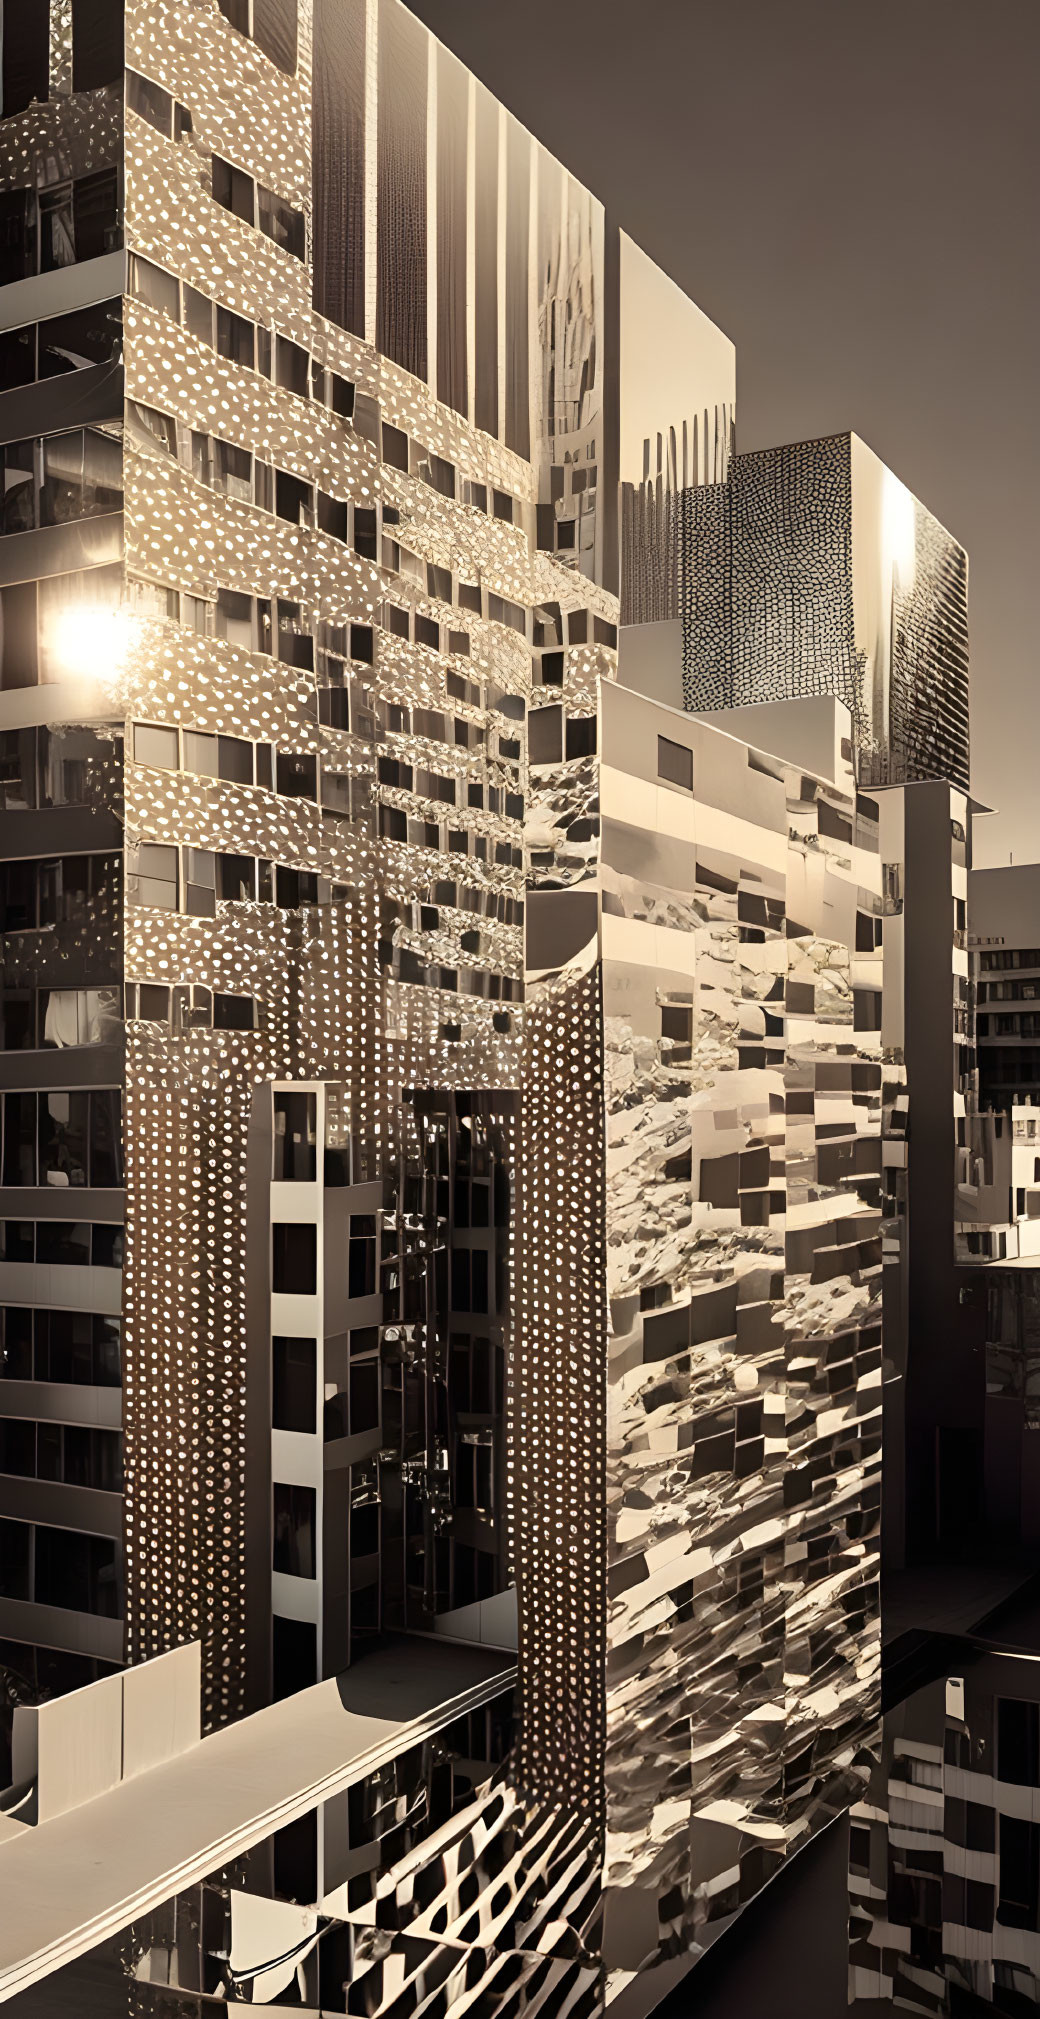 Sepia-toned image of modern buildings with patterned facades and dramatic lighting.